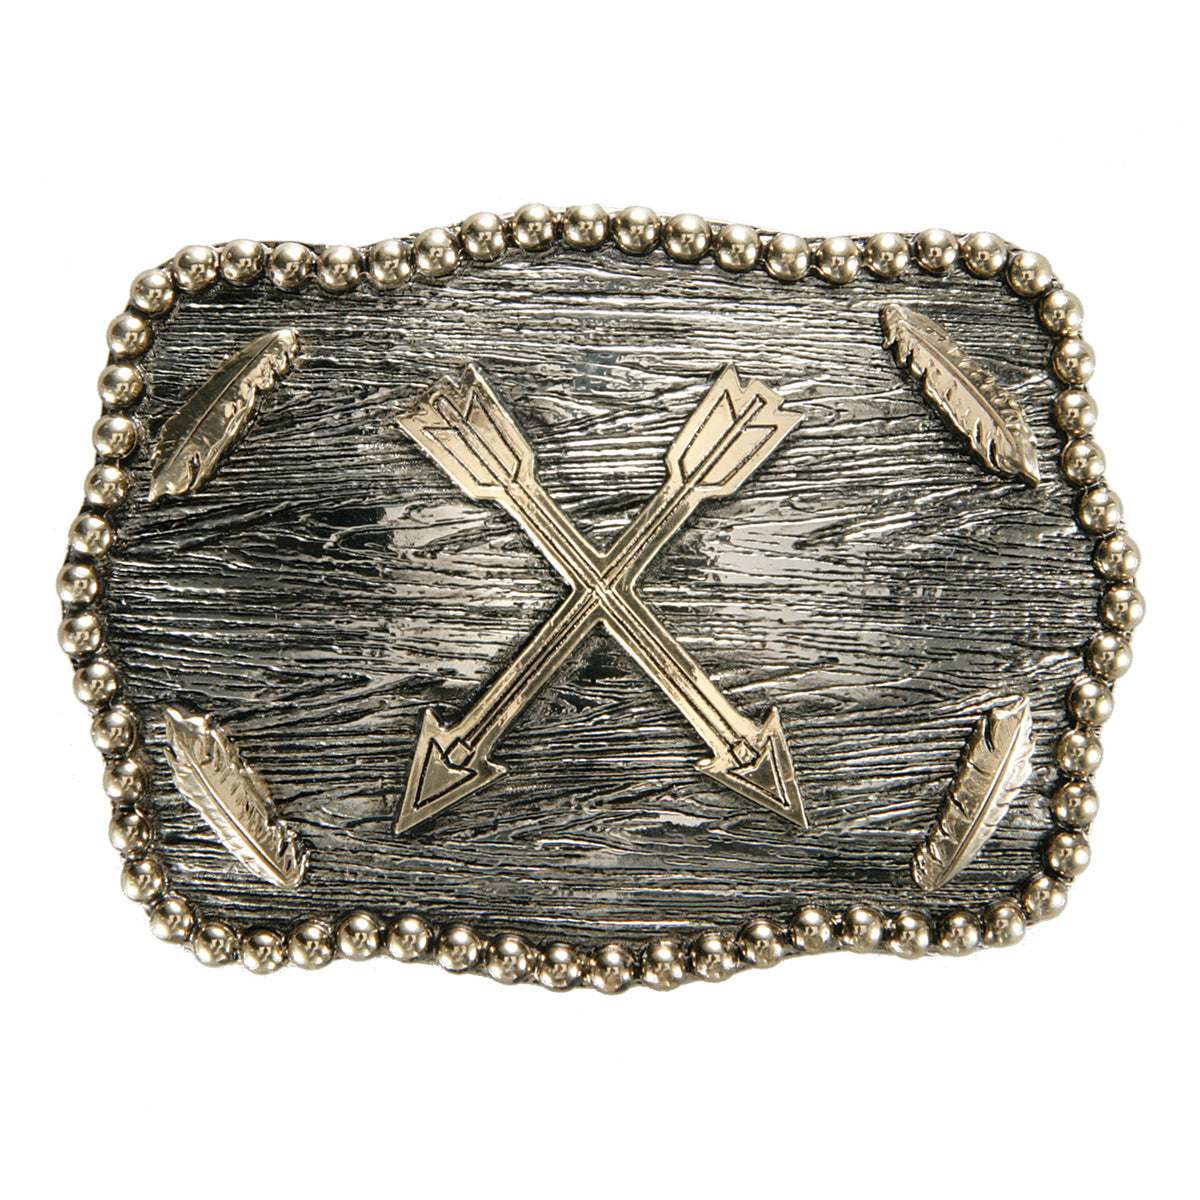 Crossed Arrows with Feathers Iconic Classic Buckle